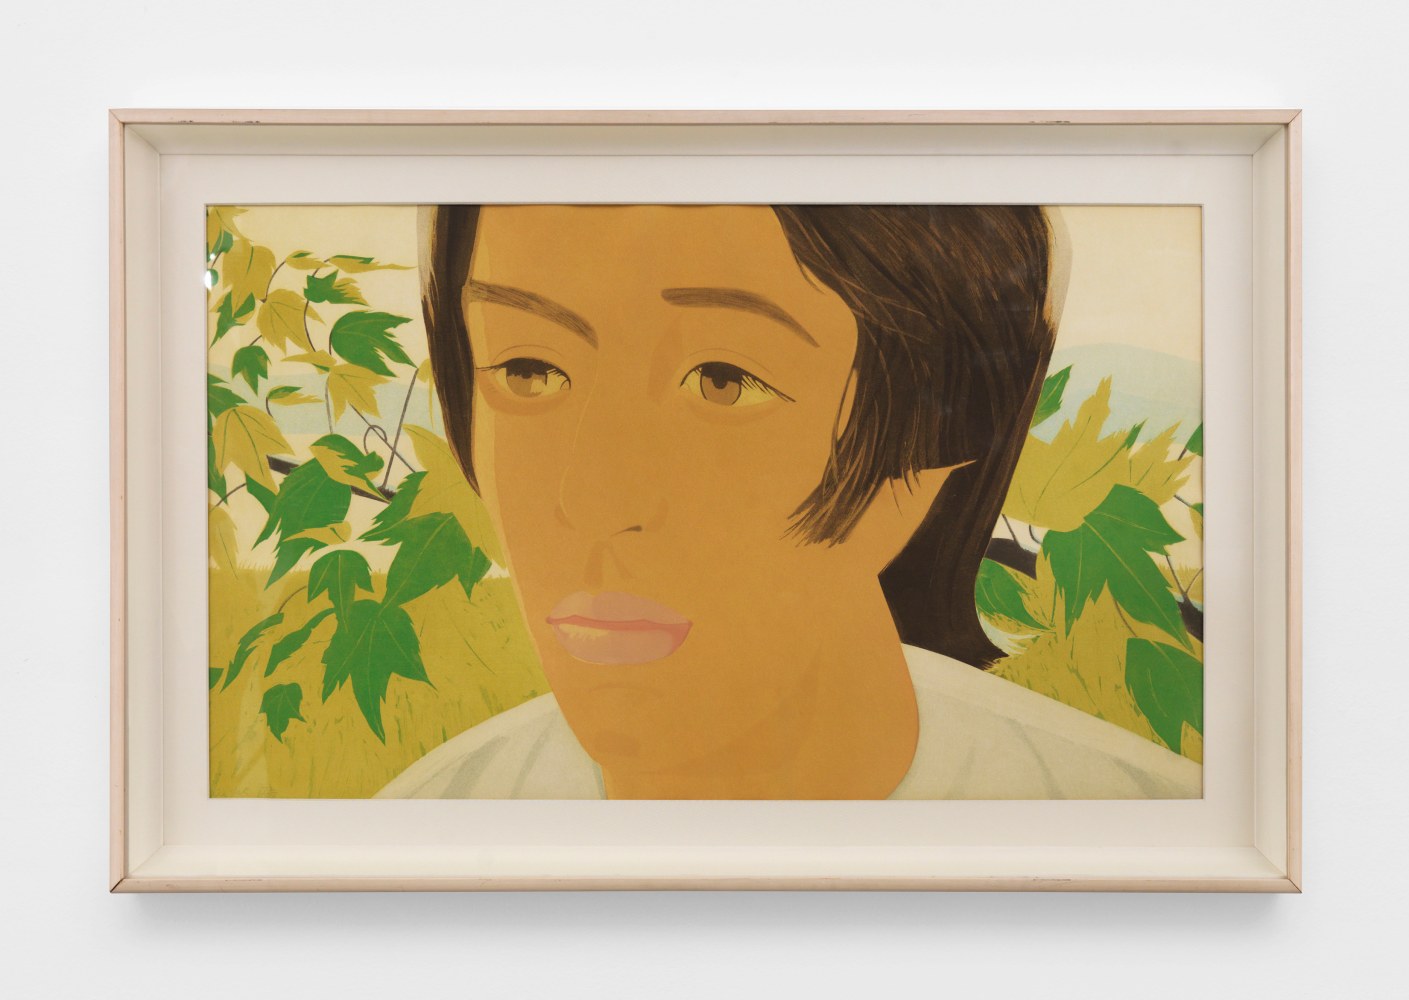 Alex Katz
Boy with Branch I, 1975
aquatint in seven colors, edition of 90
24 1/4 x 40 1/2 in. / 61.6 x 102.9 cm